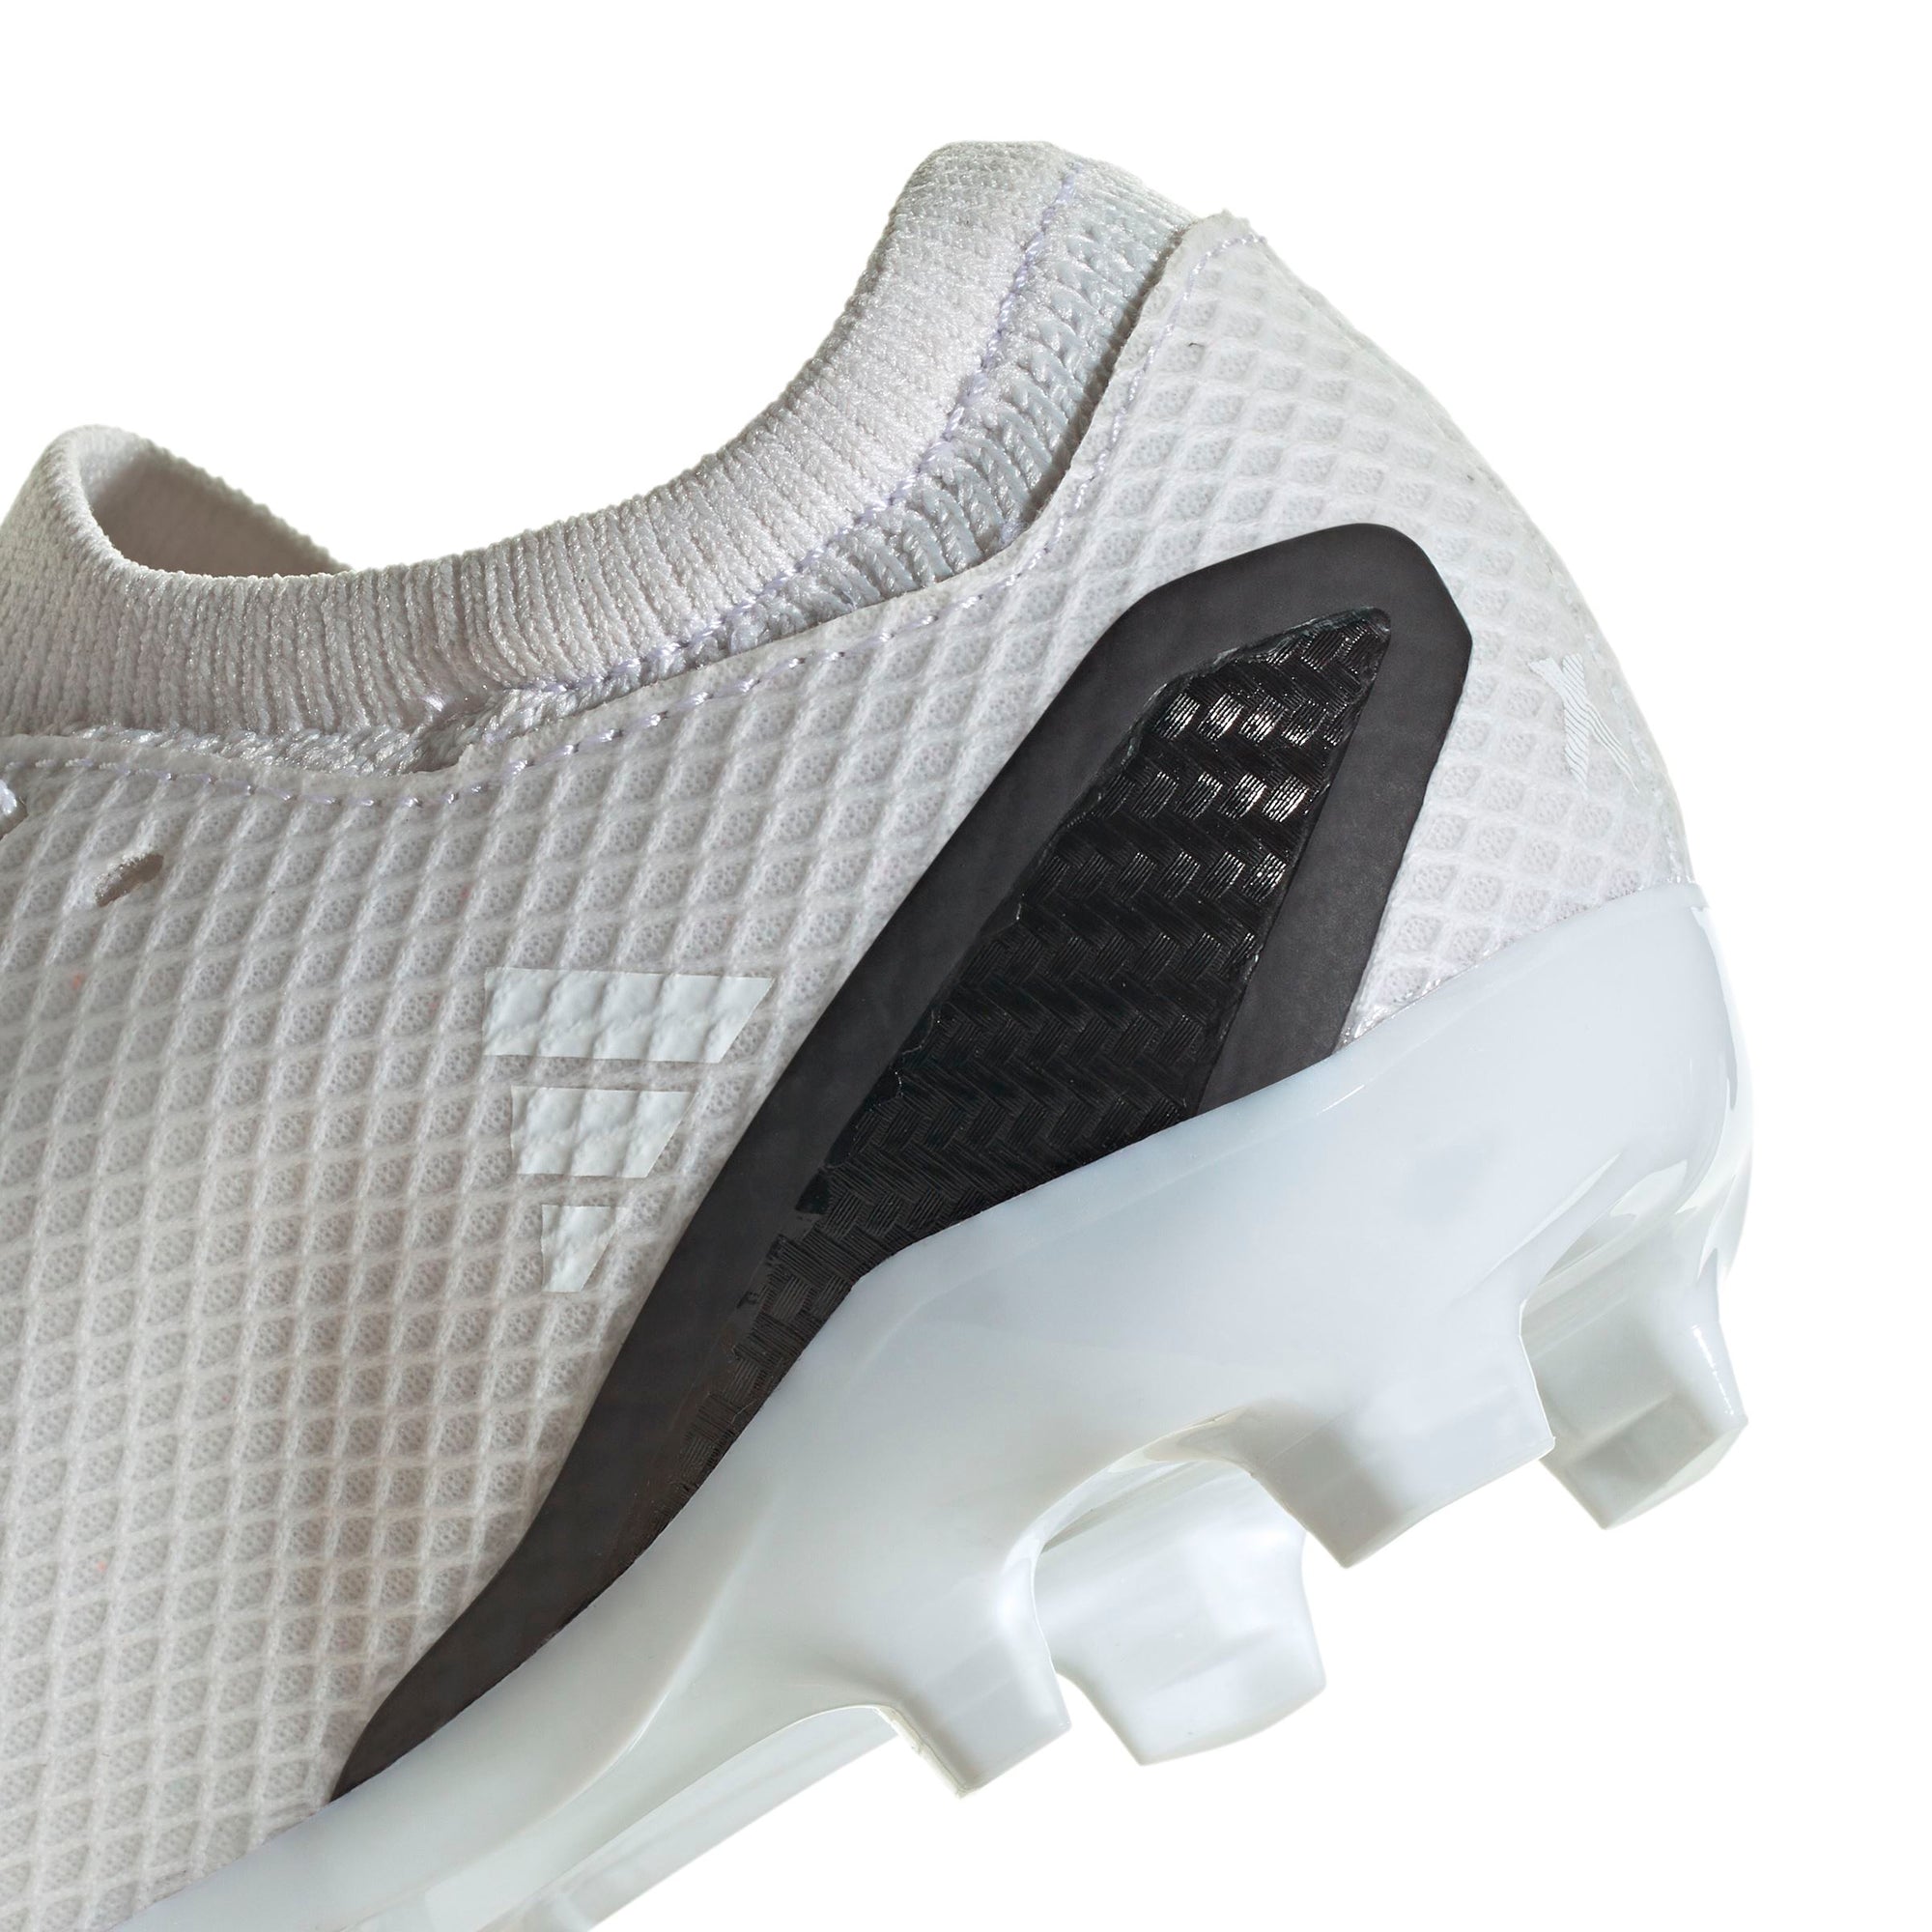 adidas Youth X Speedportal.3 Firm Ground Cleats | GZ5074 Cleats Adidas 